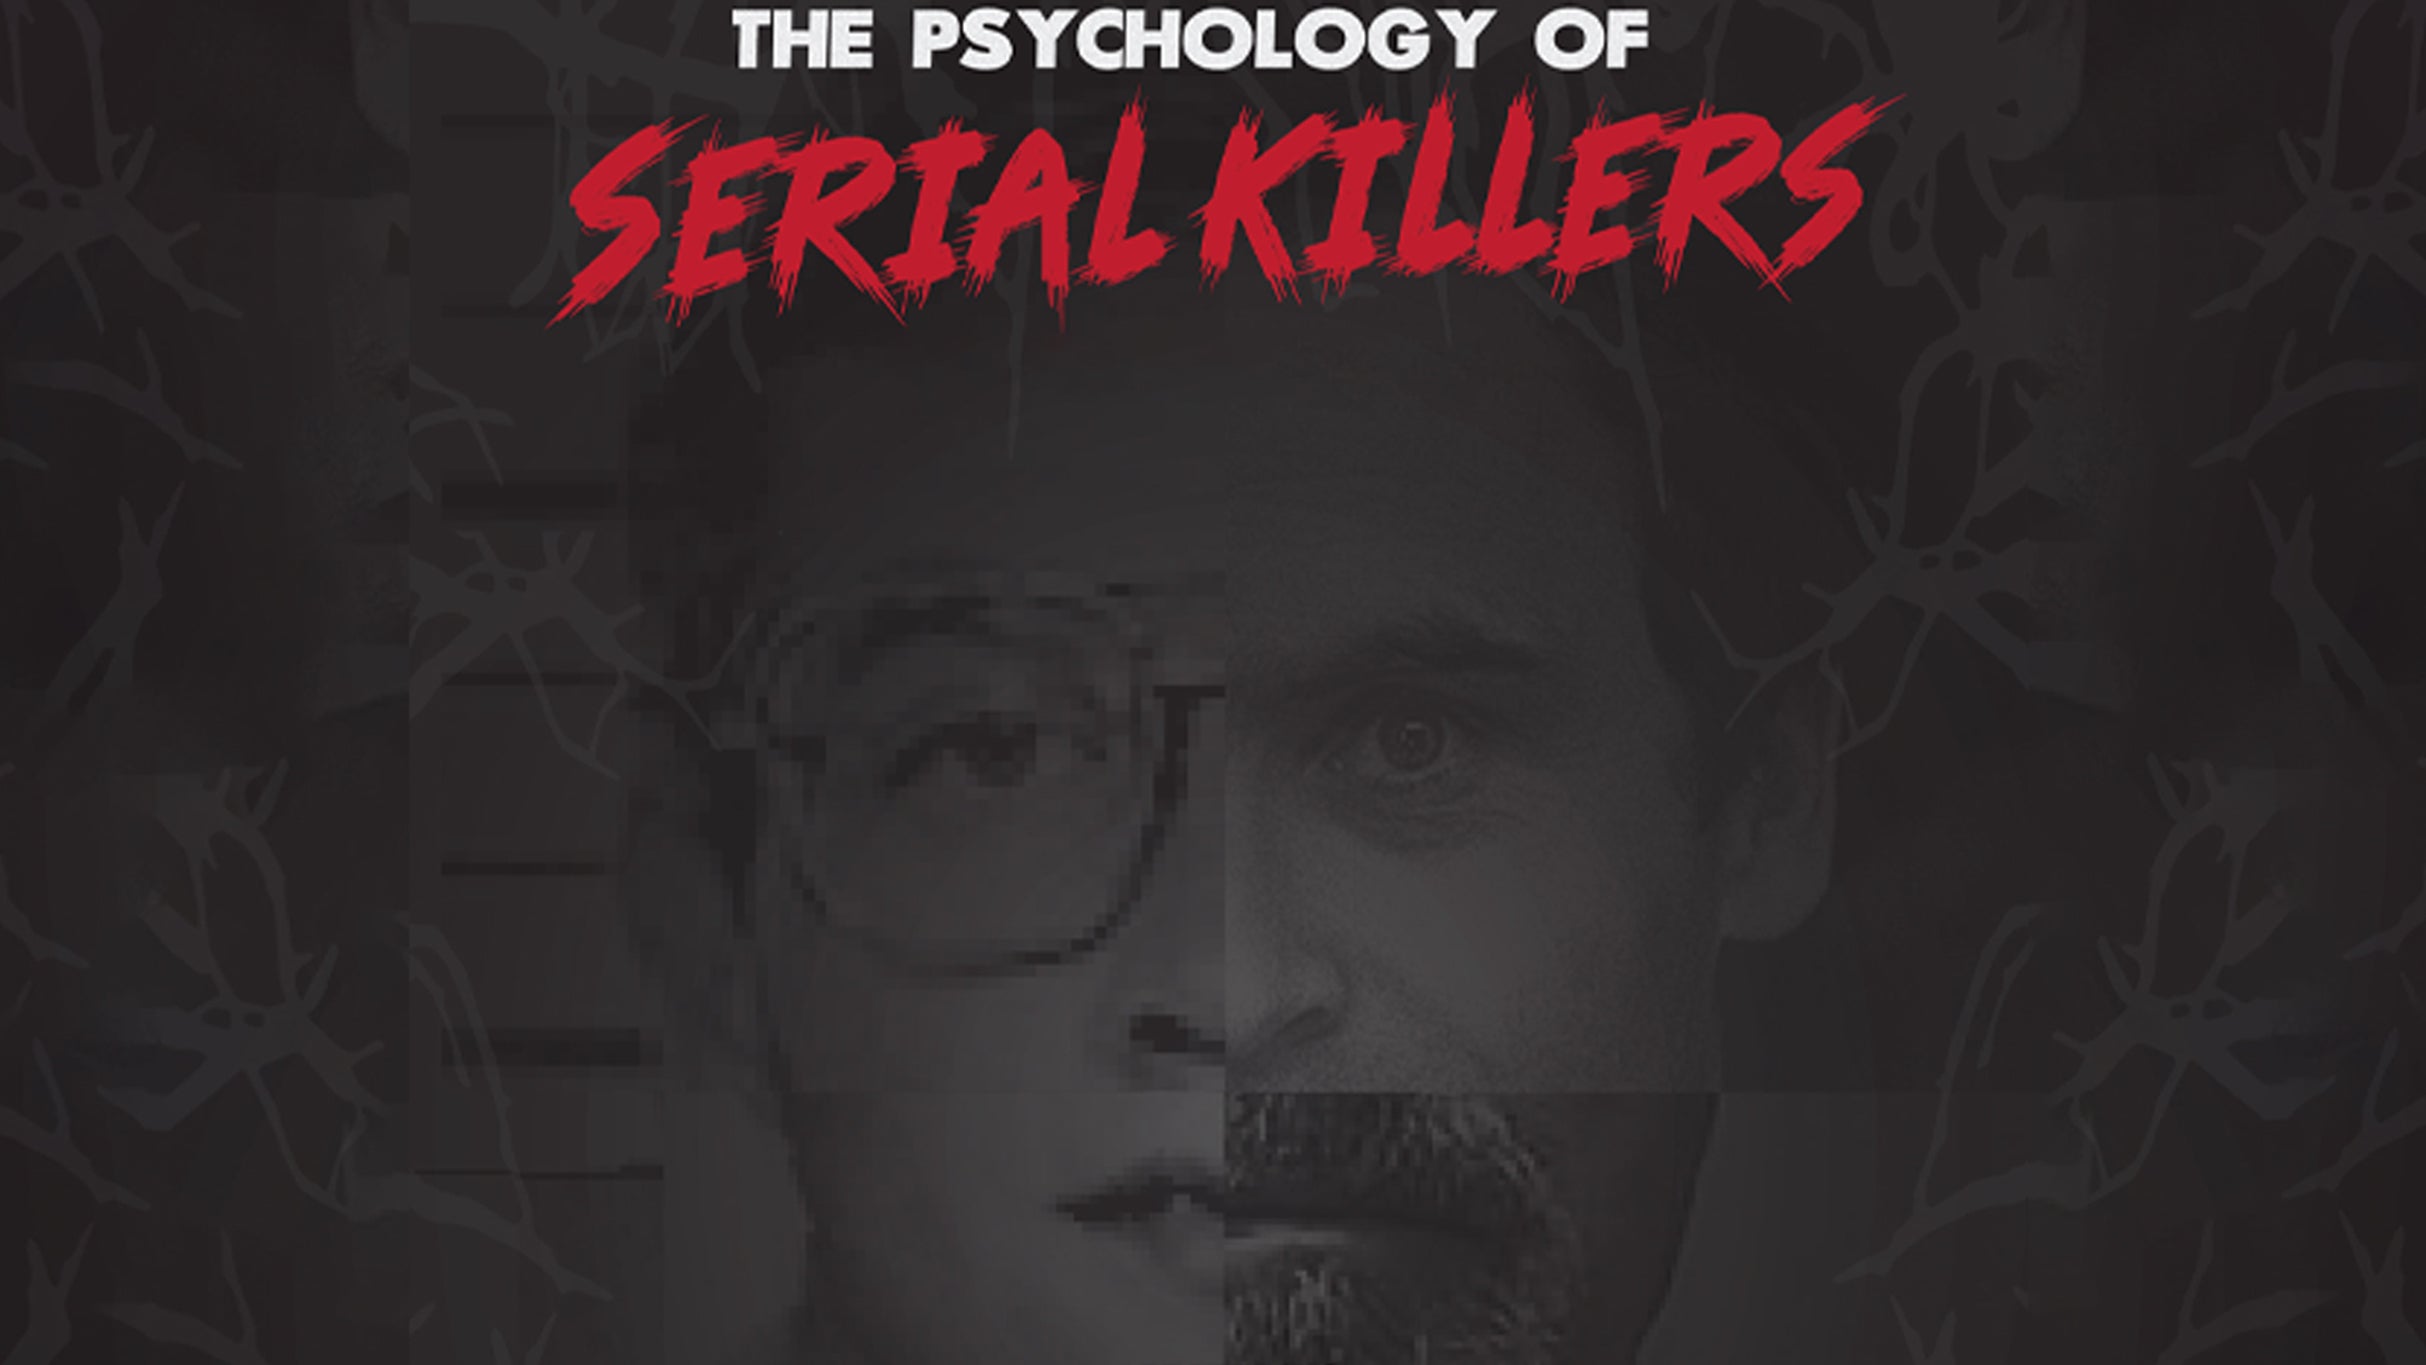 The Psychology of Serial Killers at The Magnolia